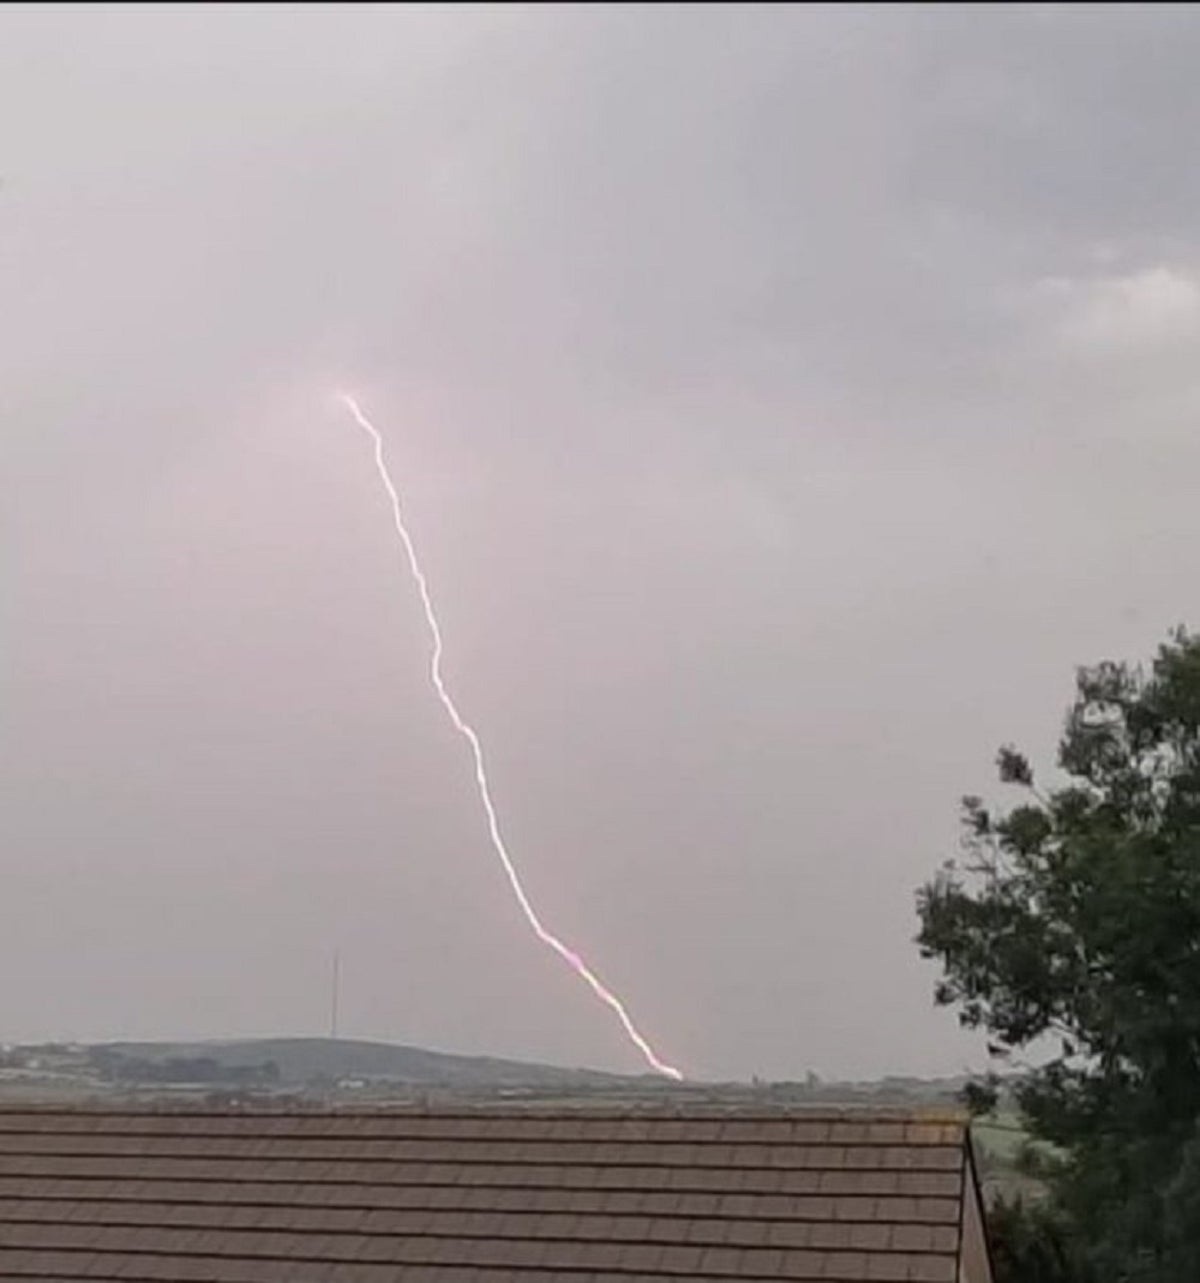 Residents ‘relieved’ as Cornwall hit by lightning and showers amid heatwave